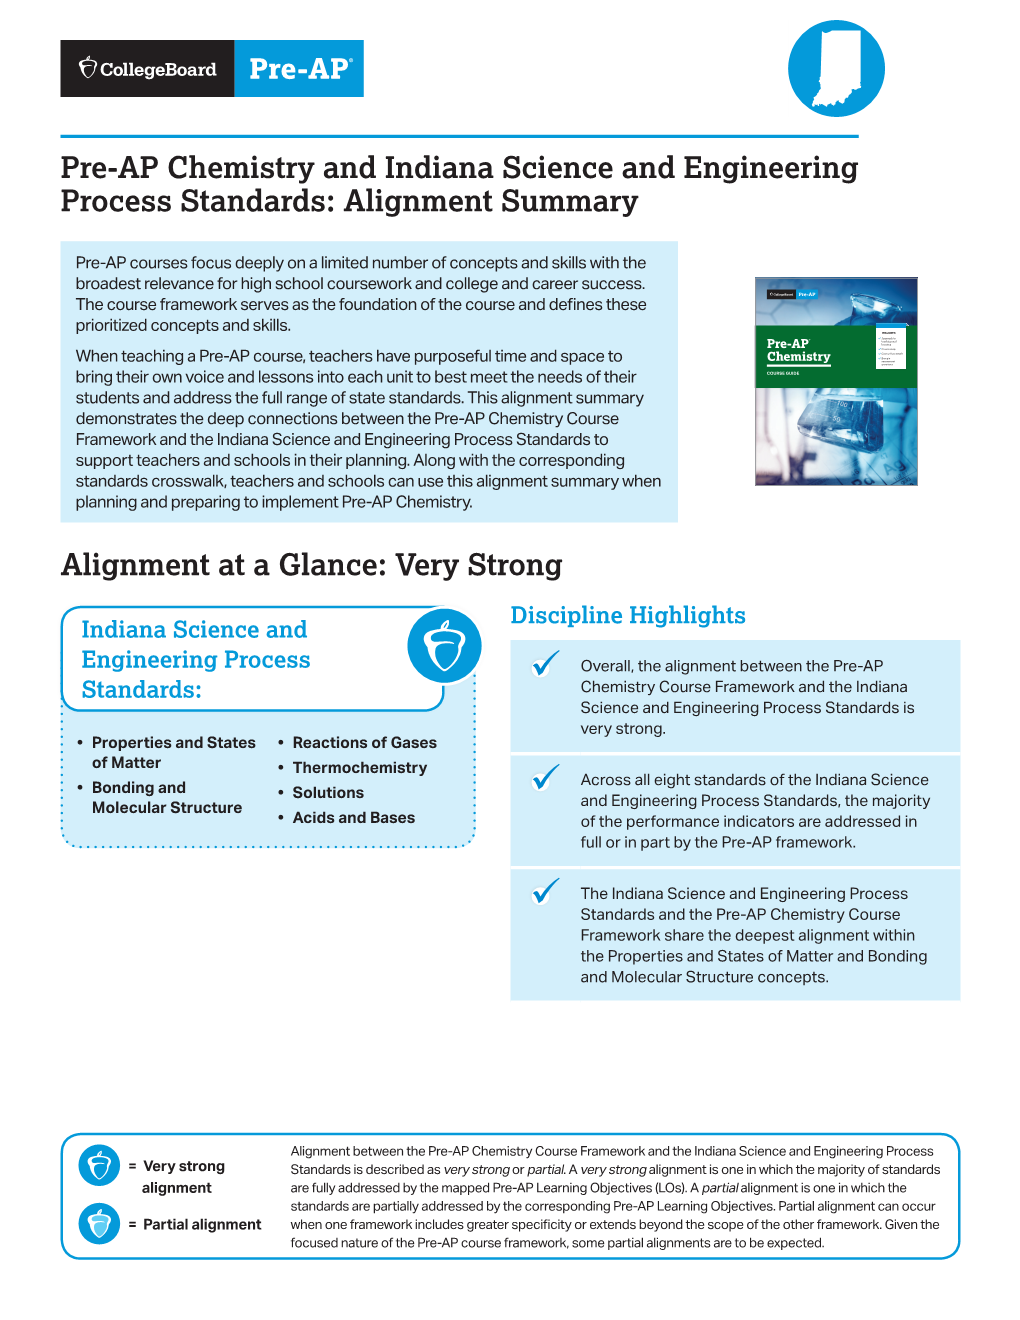 Pre-AP Chemistry and Indiana Science and Engineering Process Standards: Alignment Summary